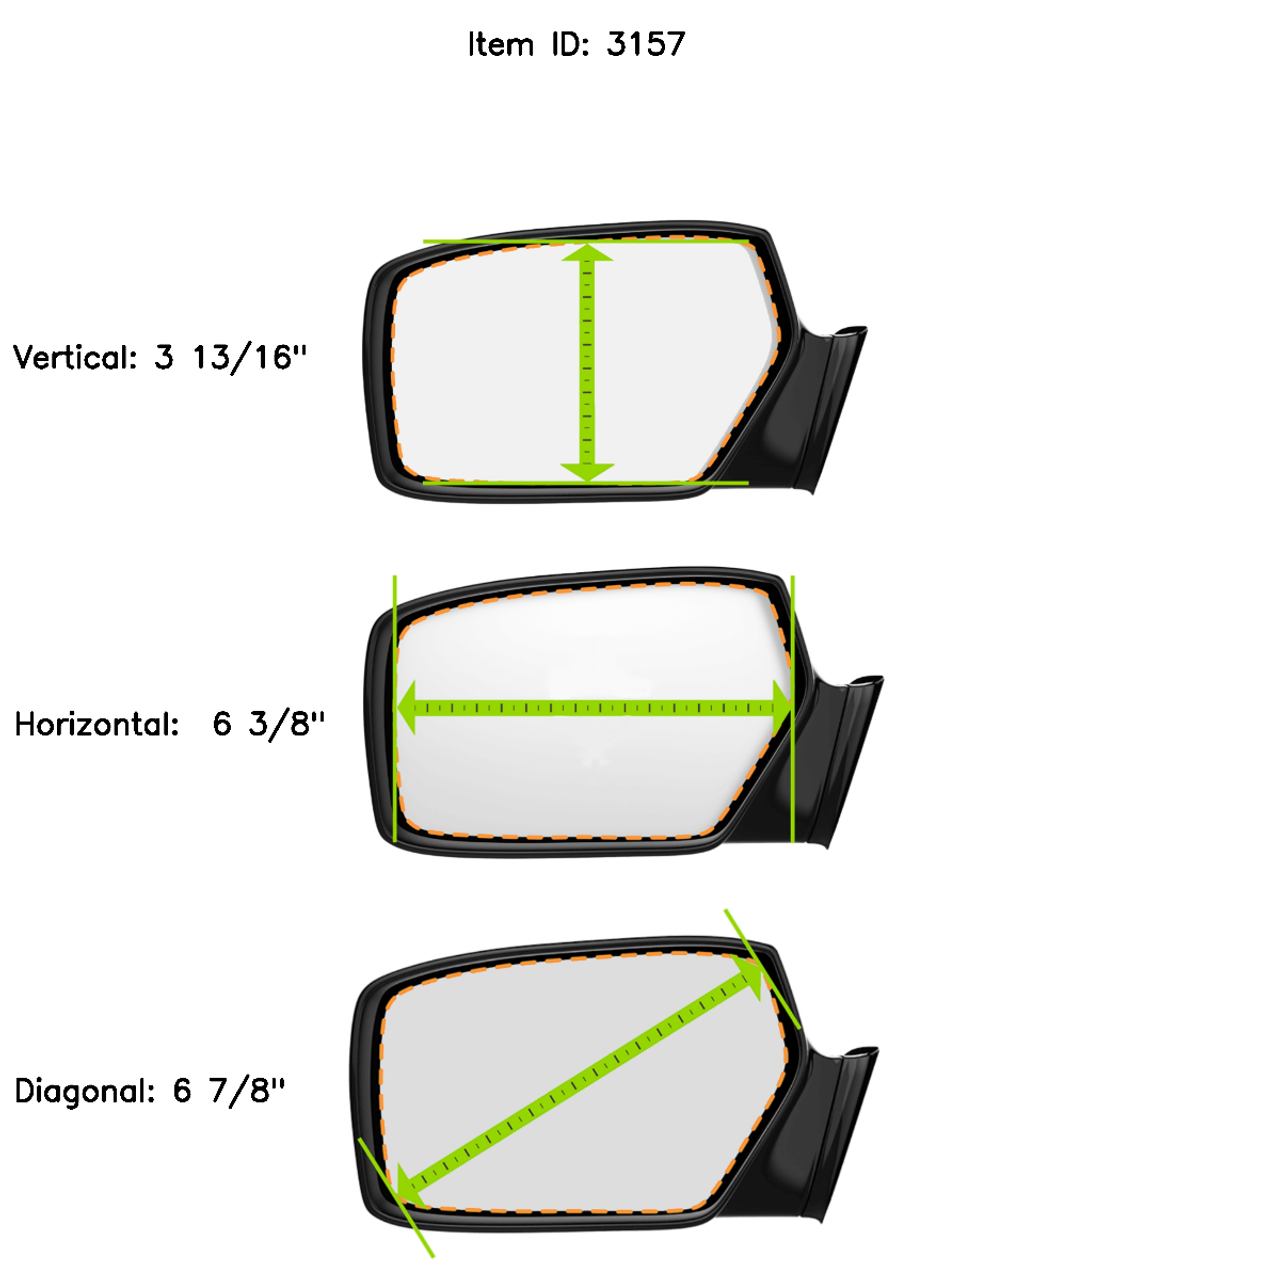 Burco 3157 Passenger Side Replacement Mirror Glass without Backing Plate Compatible with 1993-1996 Subaru Impreza